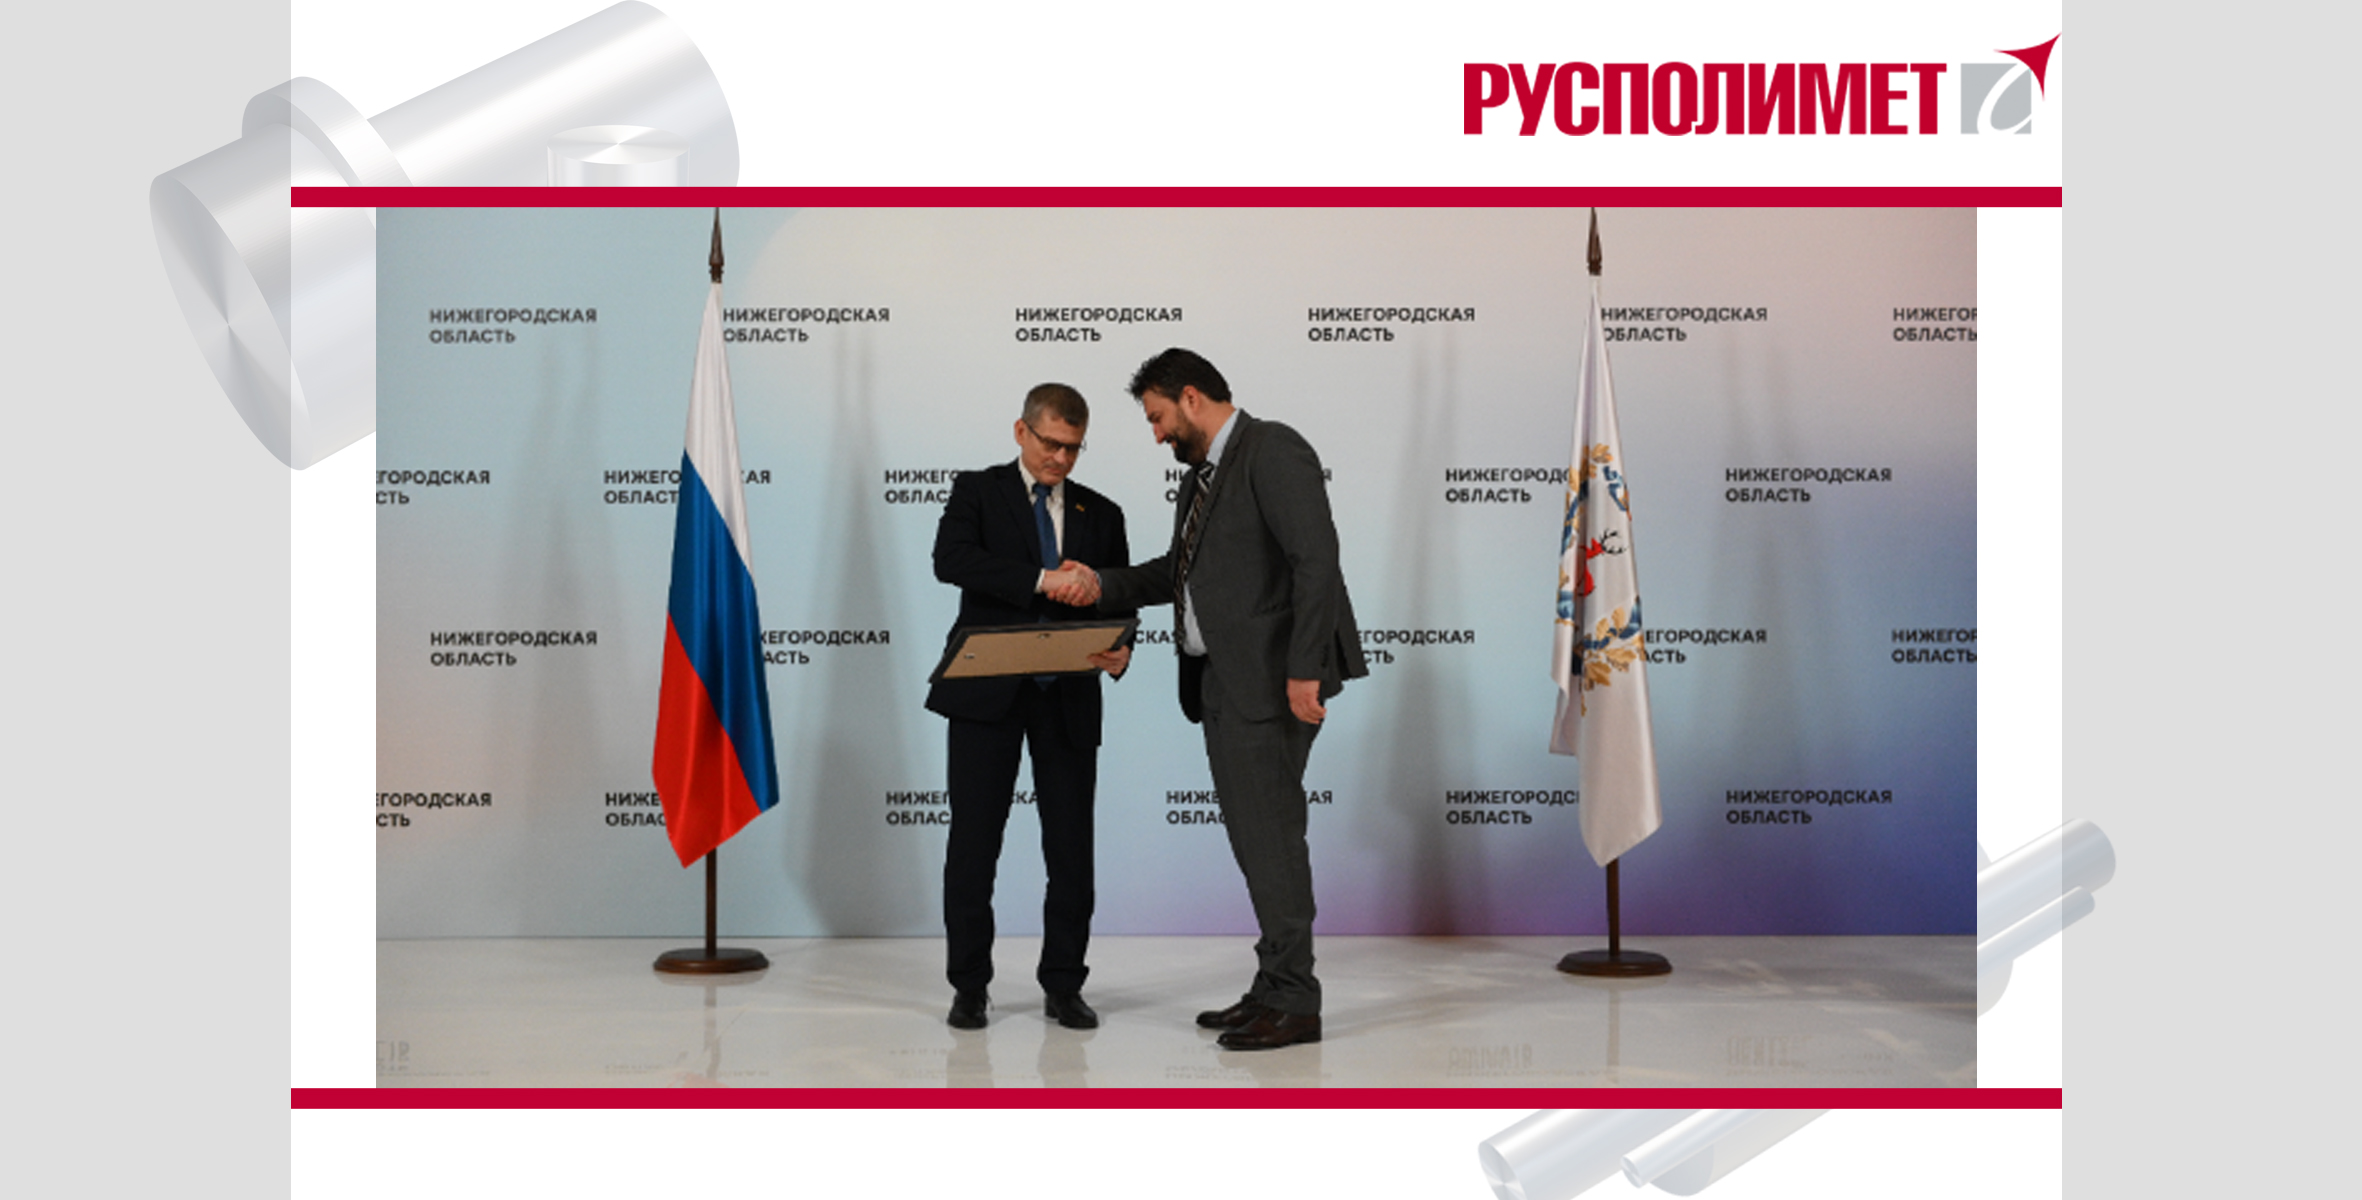 THE CEO OF RUSPOLIMET MAXIM KLOCHAI WAS AWARDED THE HONORARY DIPLOMA OF THE PRESIDENT